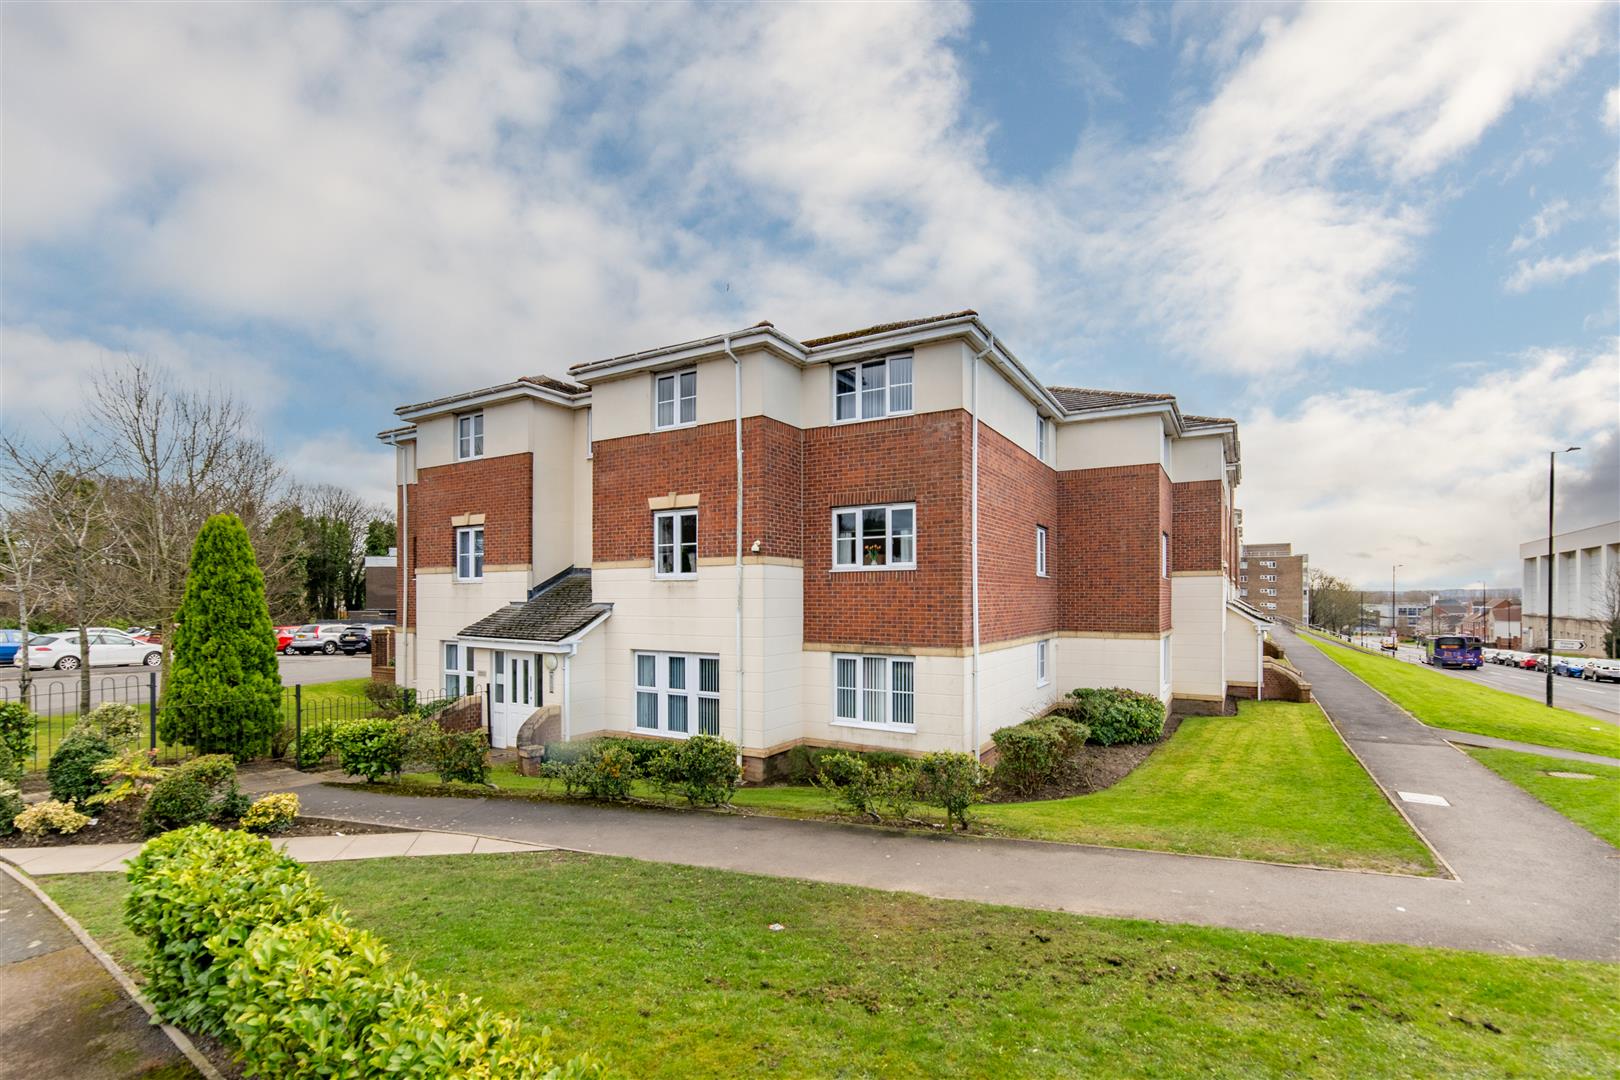 1 bed flat for sale in Regency Apartments, Killingworth - Property Image 1